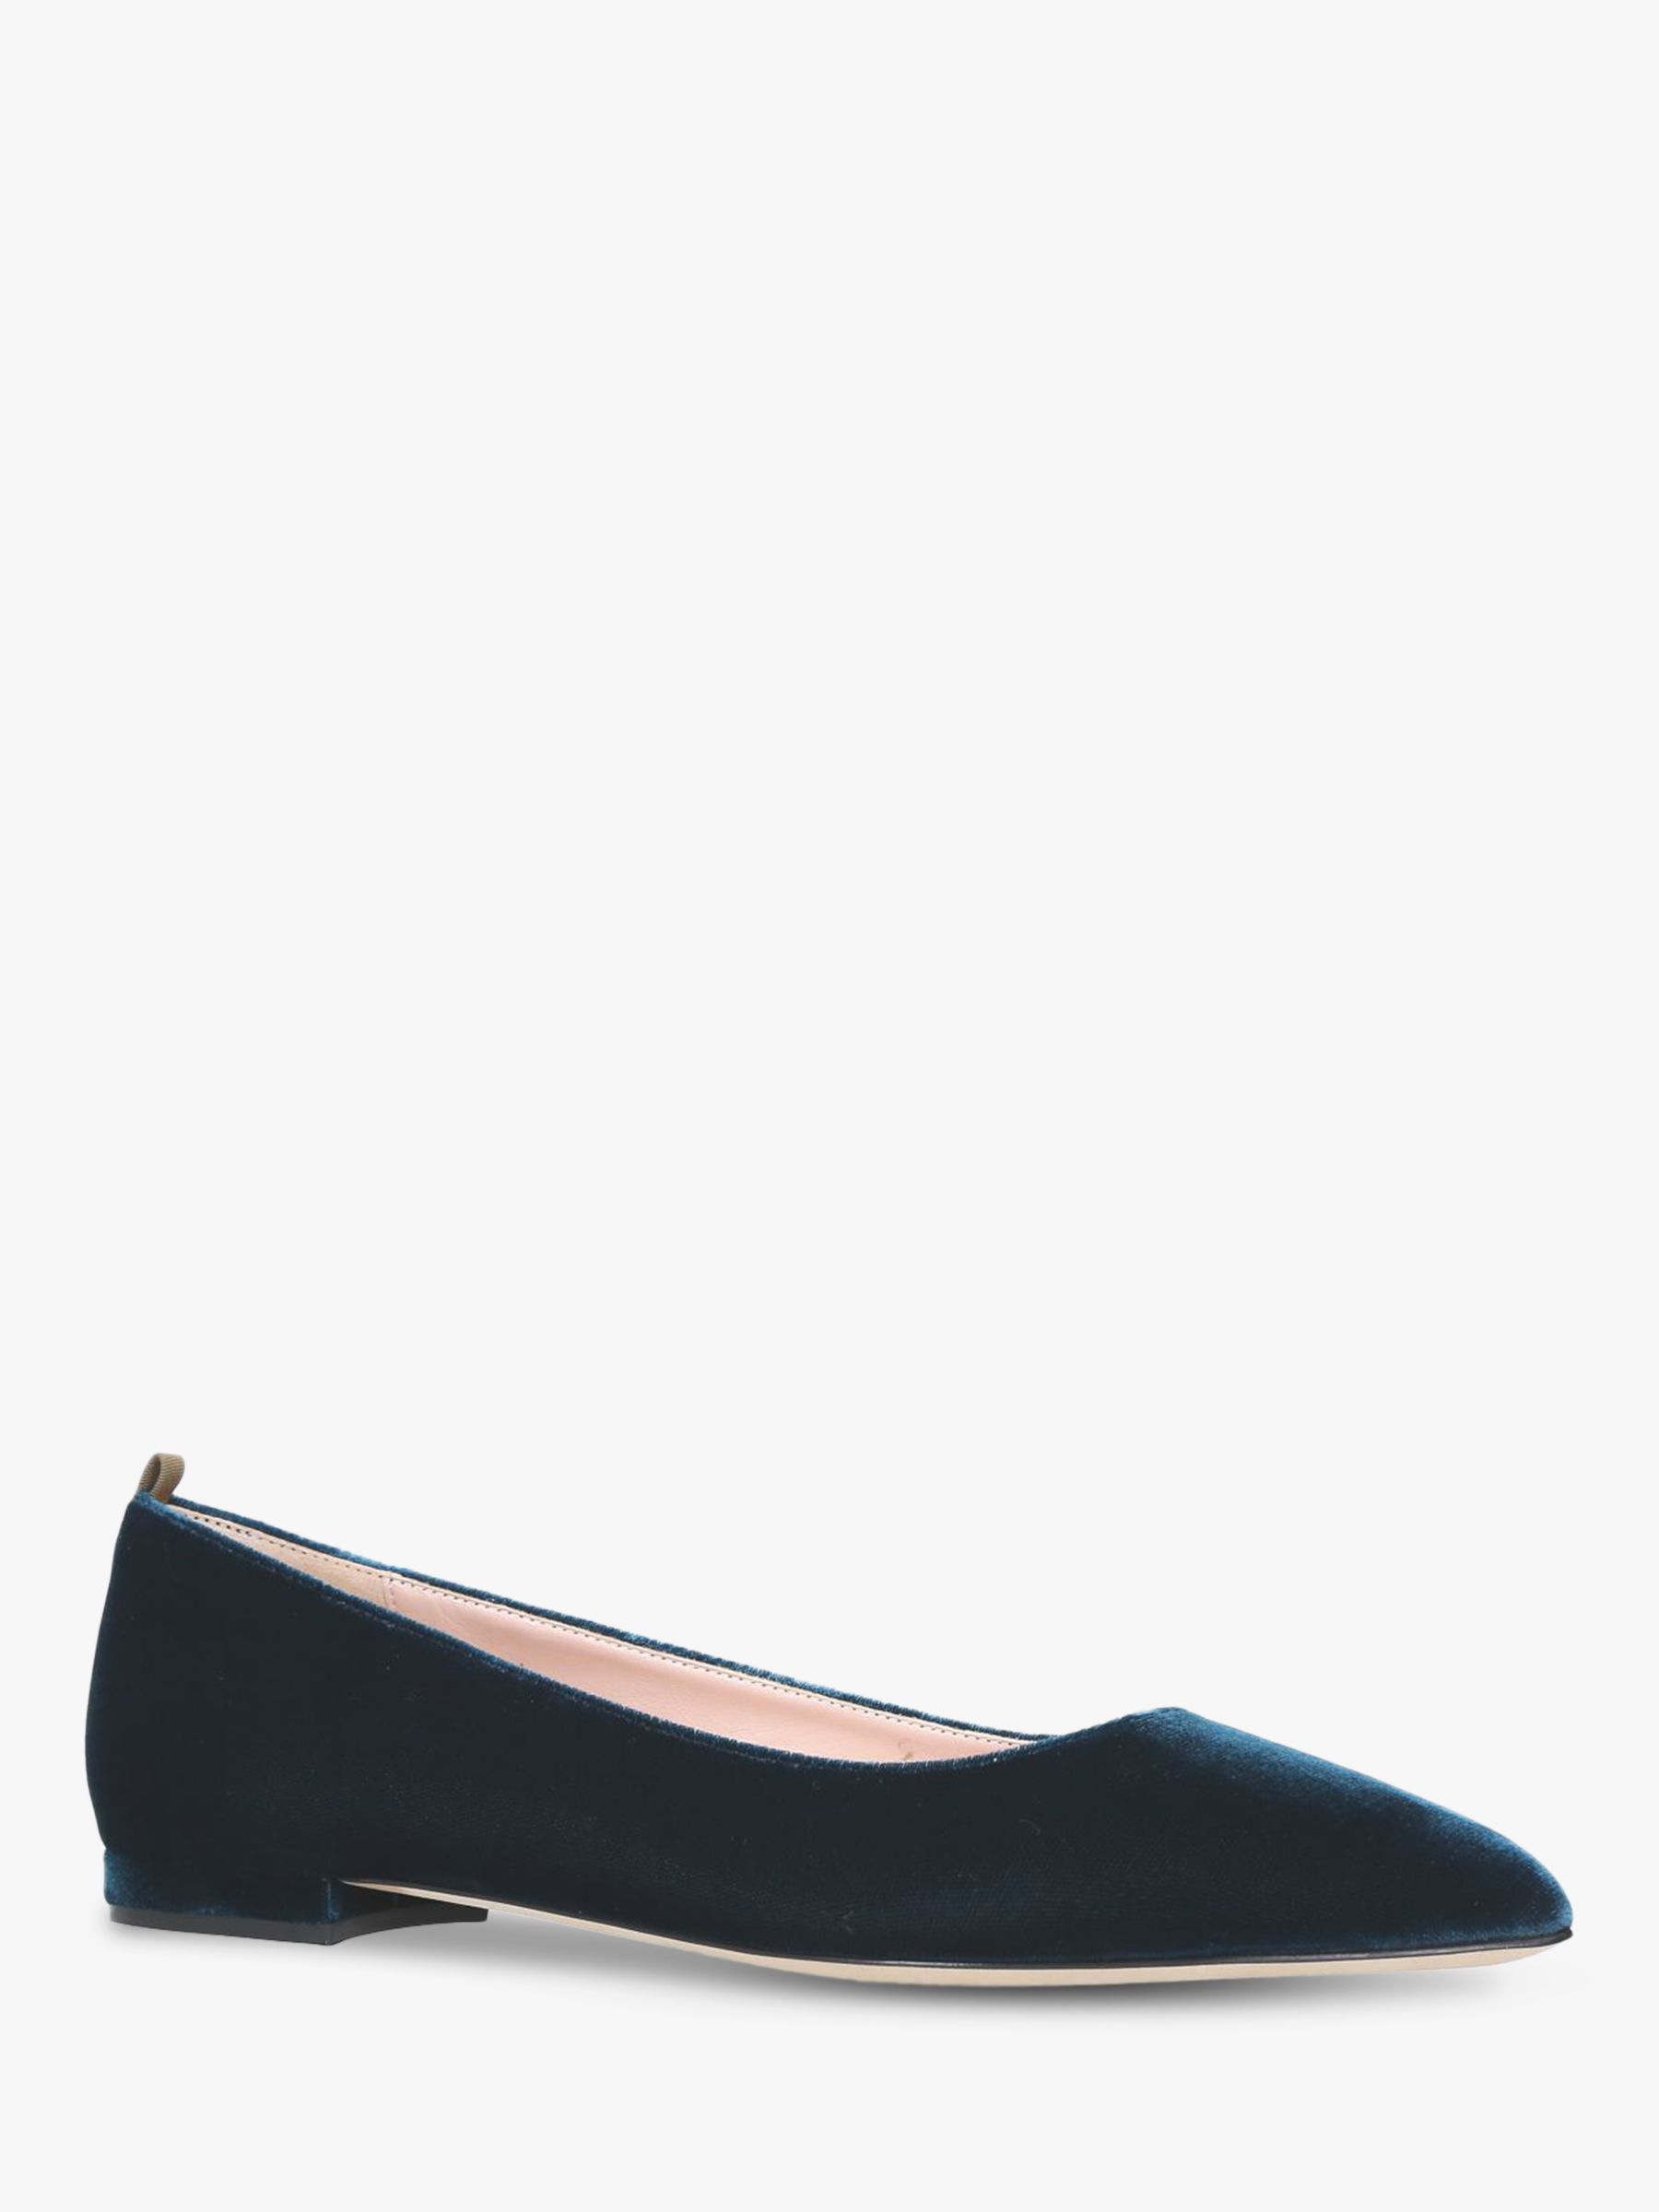 SJP by Sarah Jessica Parker Story Pointed Pumps